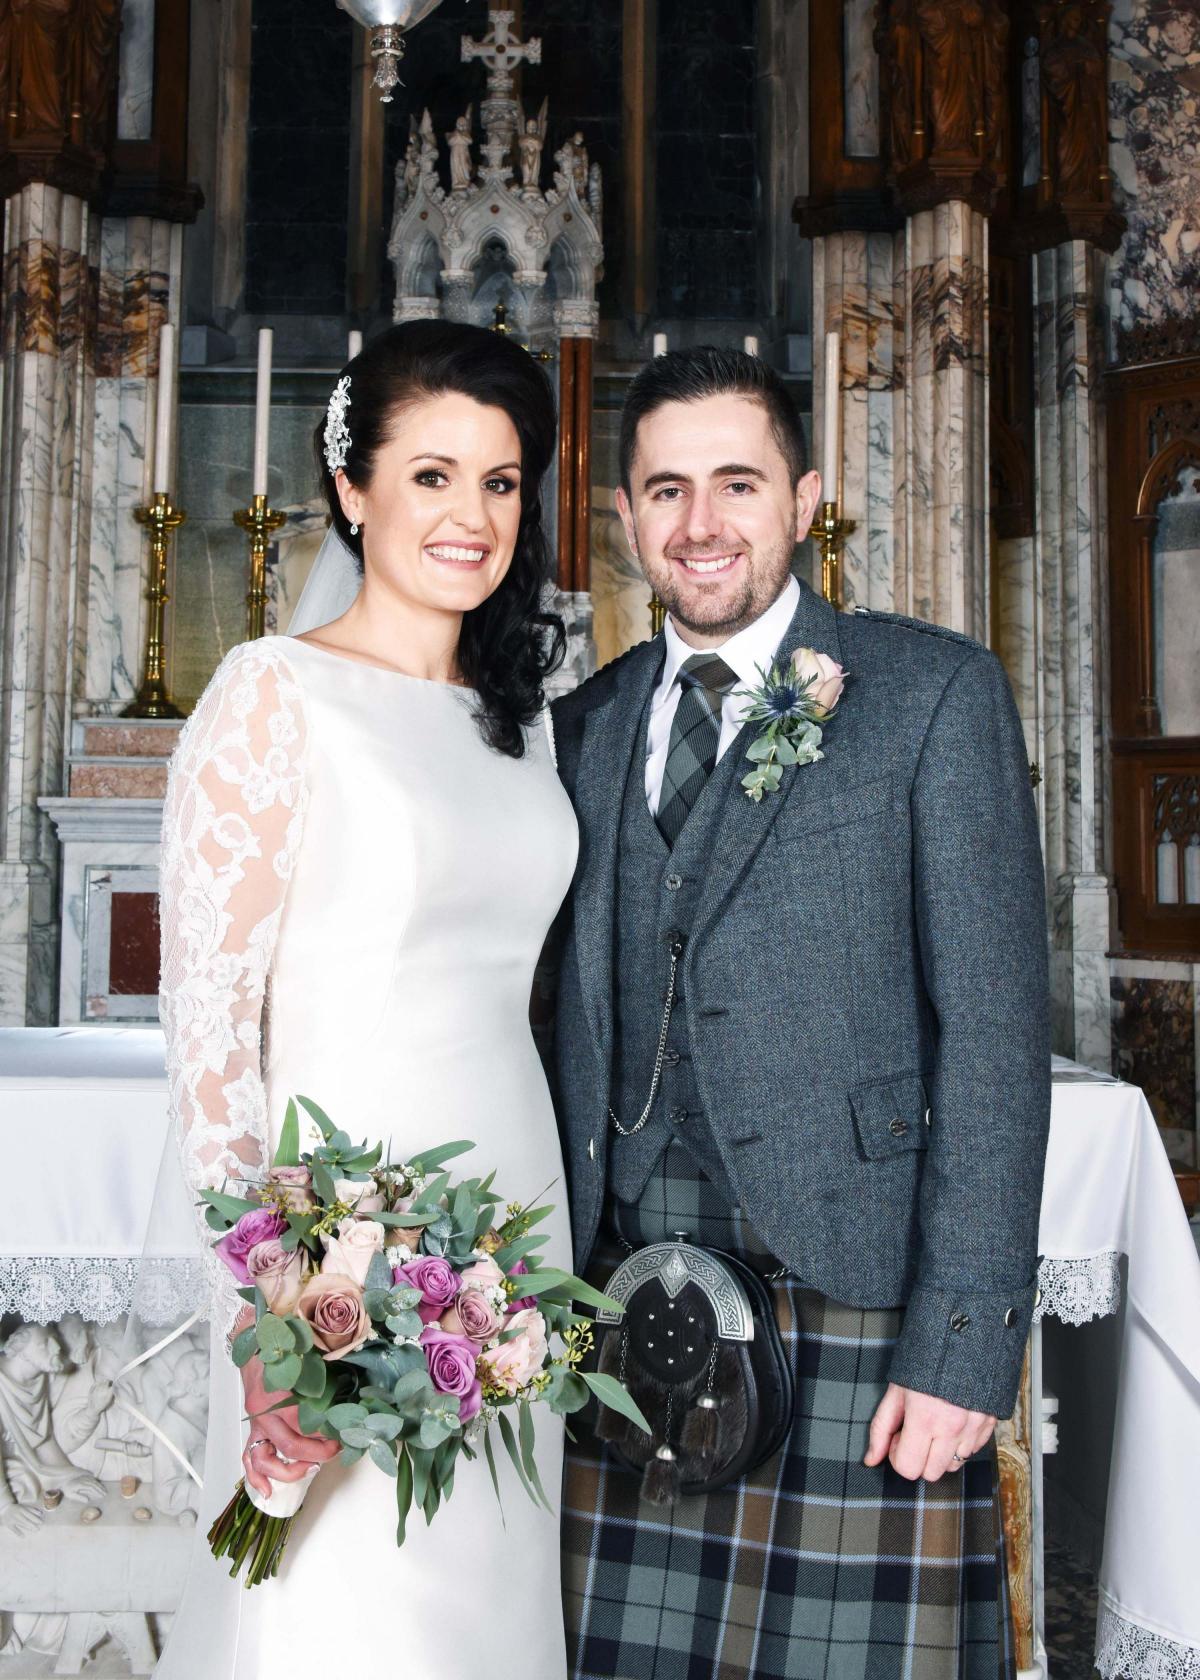 Lorinda Smith, Wester Campfield, Glassel, Banchory, married Ryan Green, formerly Linlilthgow, now Banchory, at St Mary's Chapel, Blairs, Aberdeen. Photo: Deeside Photographics